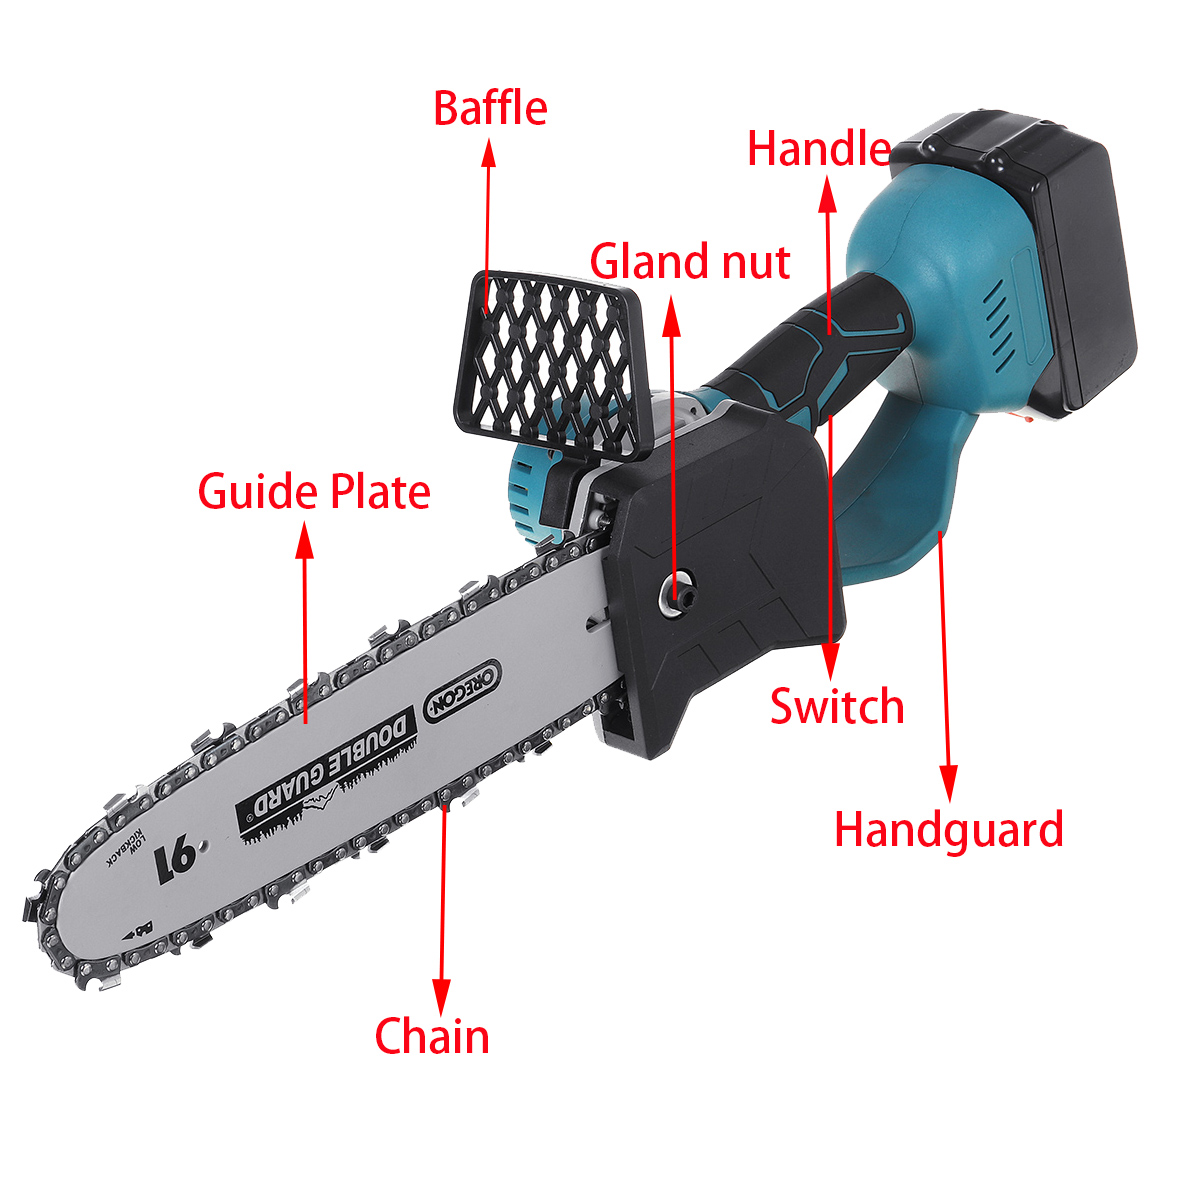 21V-Cordless-Electric-Chain-Saw-Wood-Mini-Cutter-One-Hand-Saw-Woodworking-Tool-1809275-12